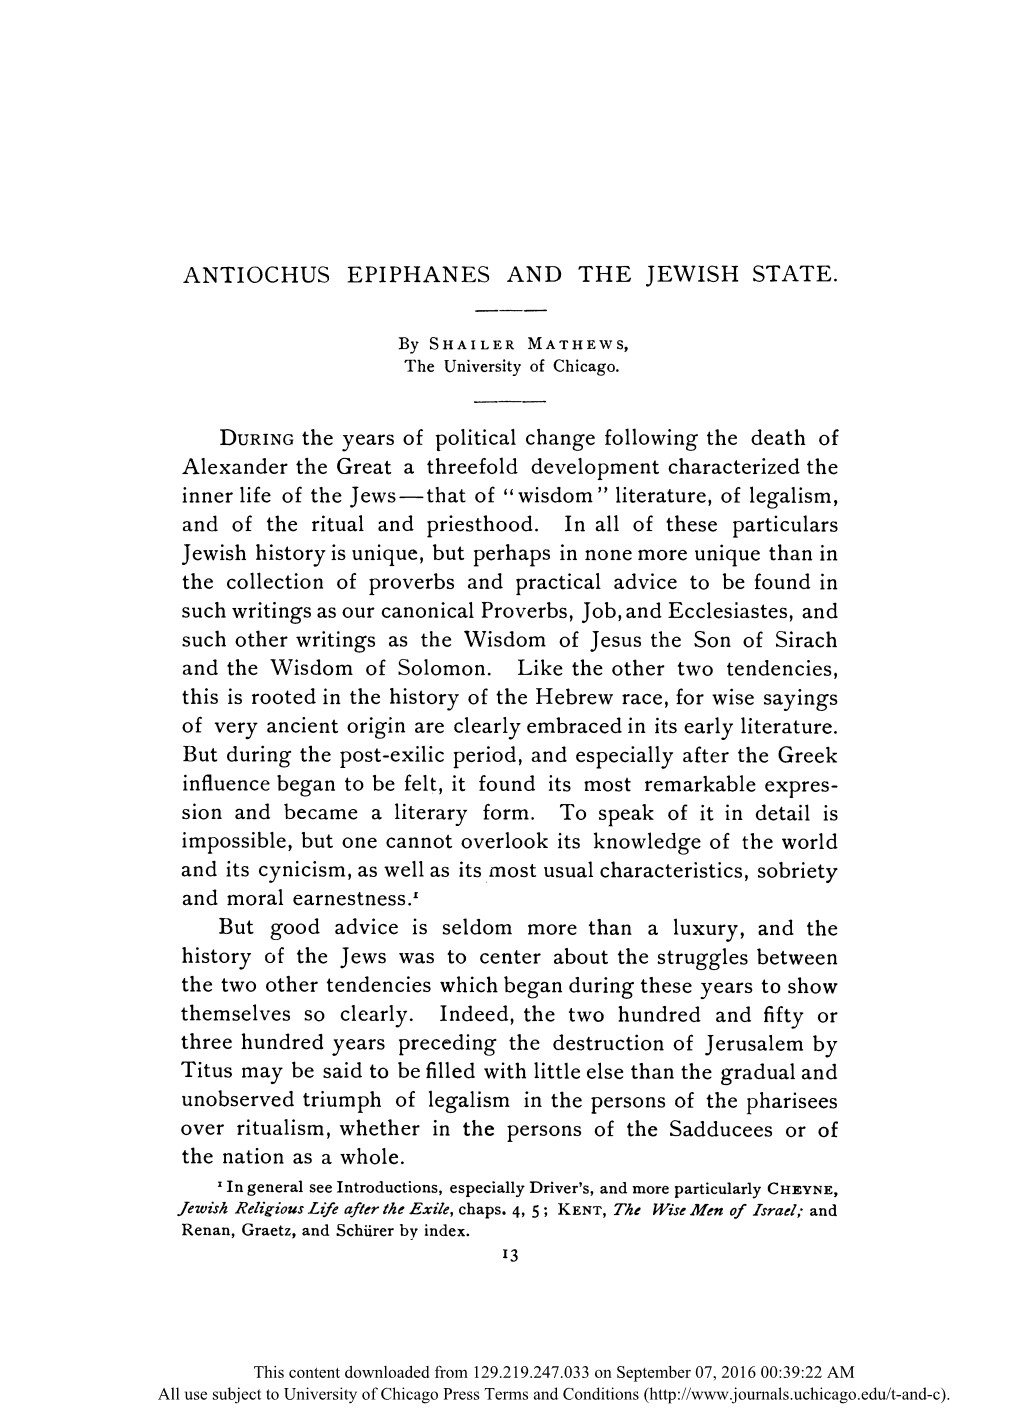 Antiochus Epiphanes and the Jewish State